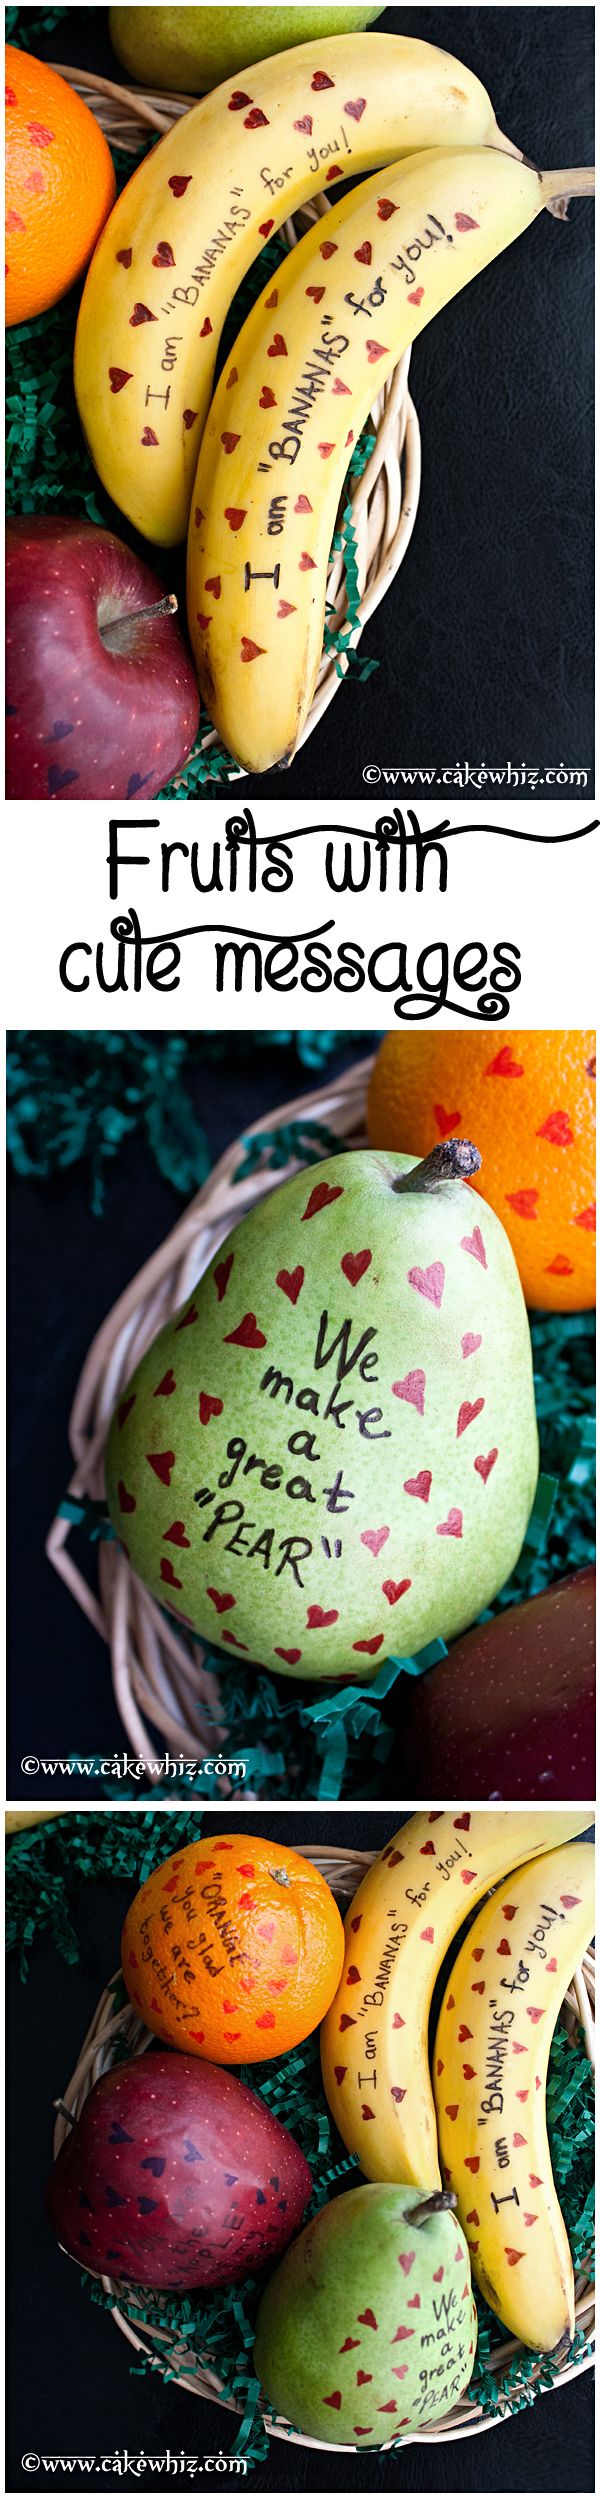 Fruits with Cute Messages 